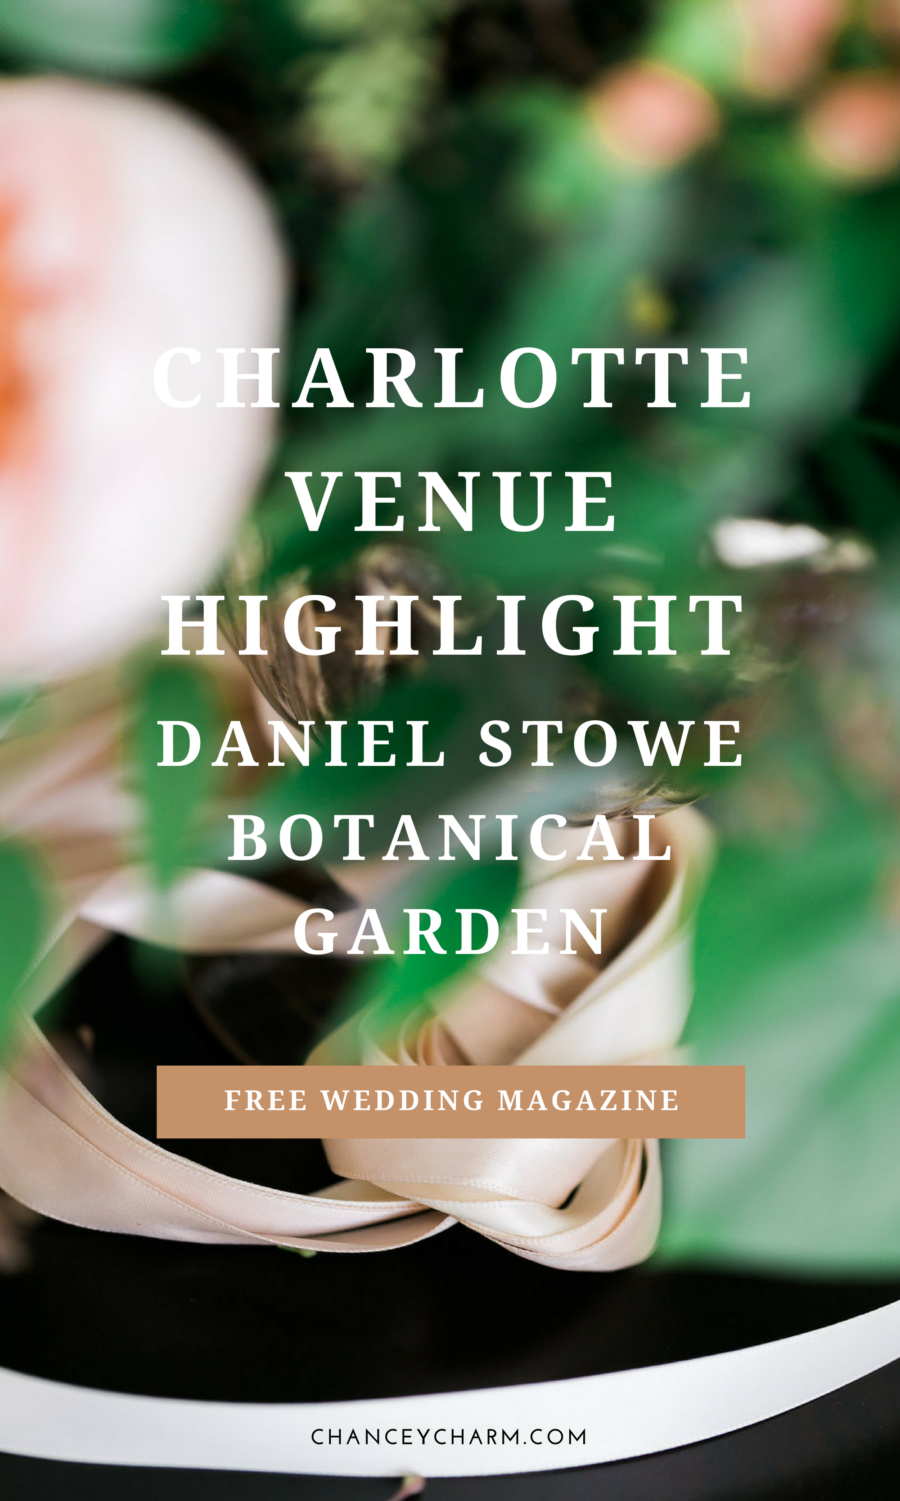 Are you looking for the perfect Charlotte wedding venue? Chancey Charm is sharing about Daniel Stowe Botanical Garden, a garden wedding venue with multiple ceremony and reception spaces + access to our FREE Wedding Planning Magazine! #chanceycharm #weddingplanninganddesign #charlottewedding #charlotteweddingplanner #charlotteweddingvenue